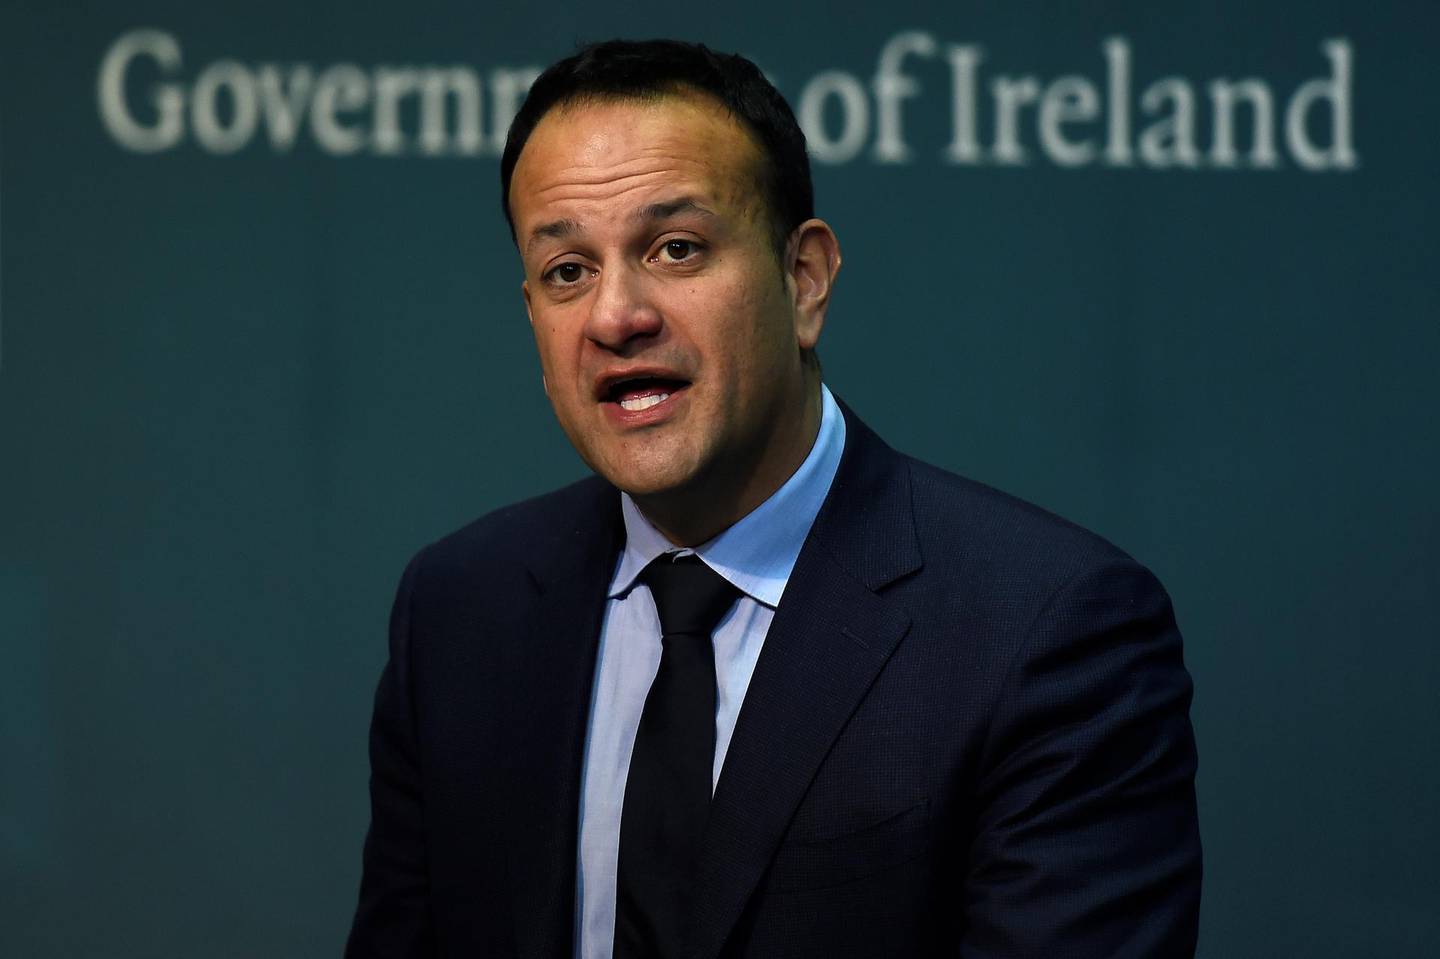 Taoiseach (Prime Minister) of Ireland Leo Varadkar speaks at a news conference announcing that the Irish Government will hold a referendum on liberalising abortion laws at the end of May, in Dublin, Ireland, January 29, 2018. REUTERS/Clodagh Kilcoyne